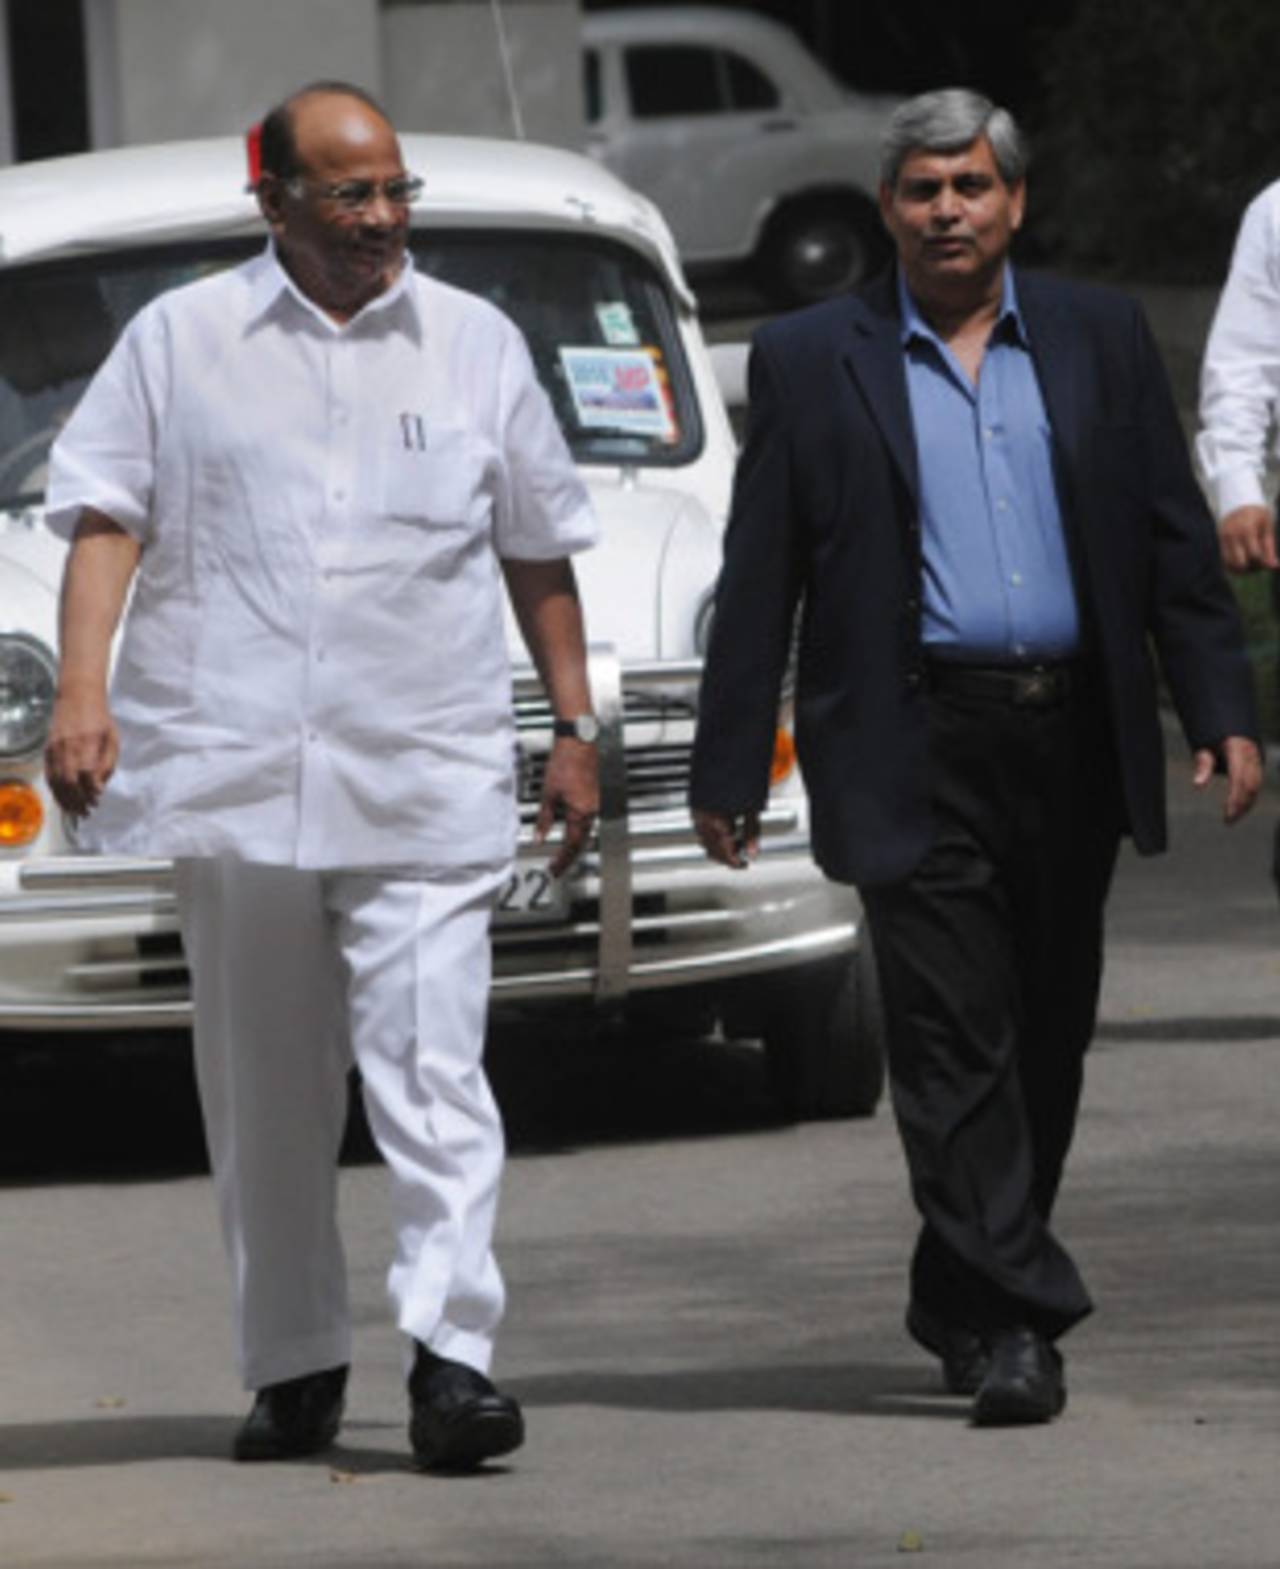 Indian Minister of Agriculture Sharad Pawar and BCCI chief Shashank Manohar following a meeting at Pawar's residence in New Delhi, April 20, 2010